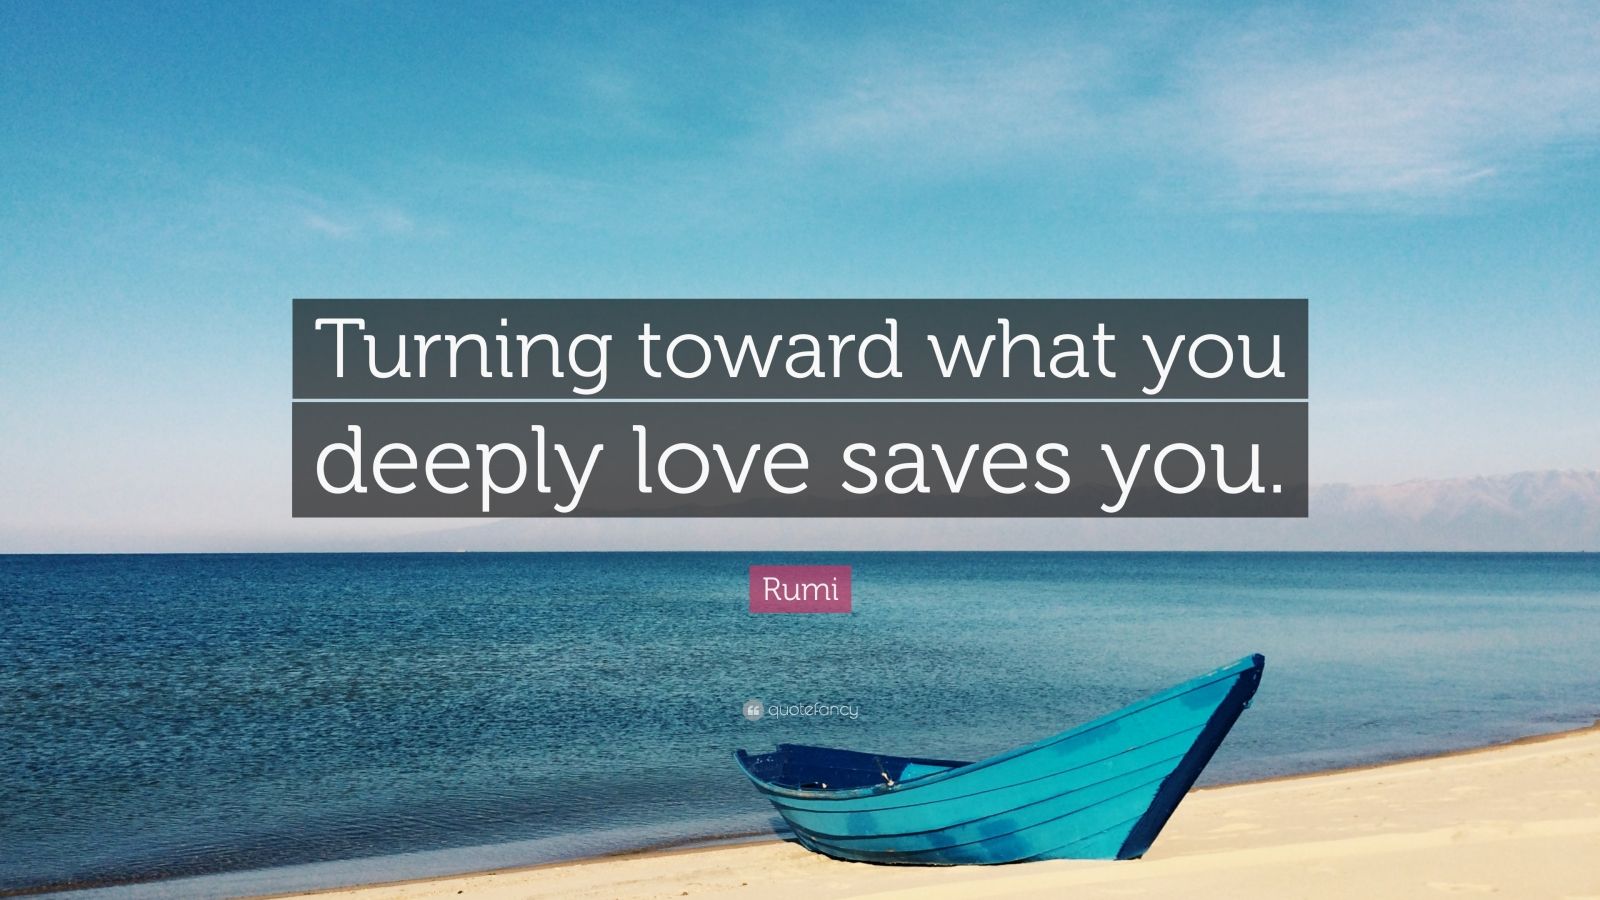 Rumi Quote: “Turning toward what you deeply love saves you.”